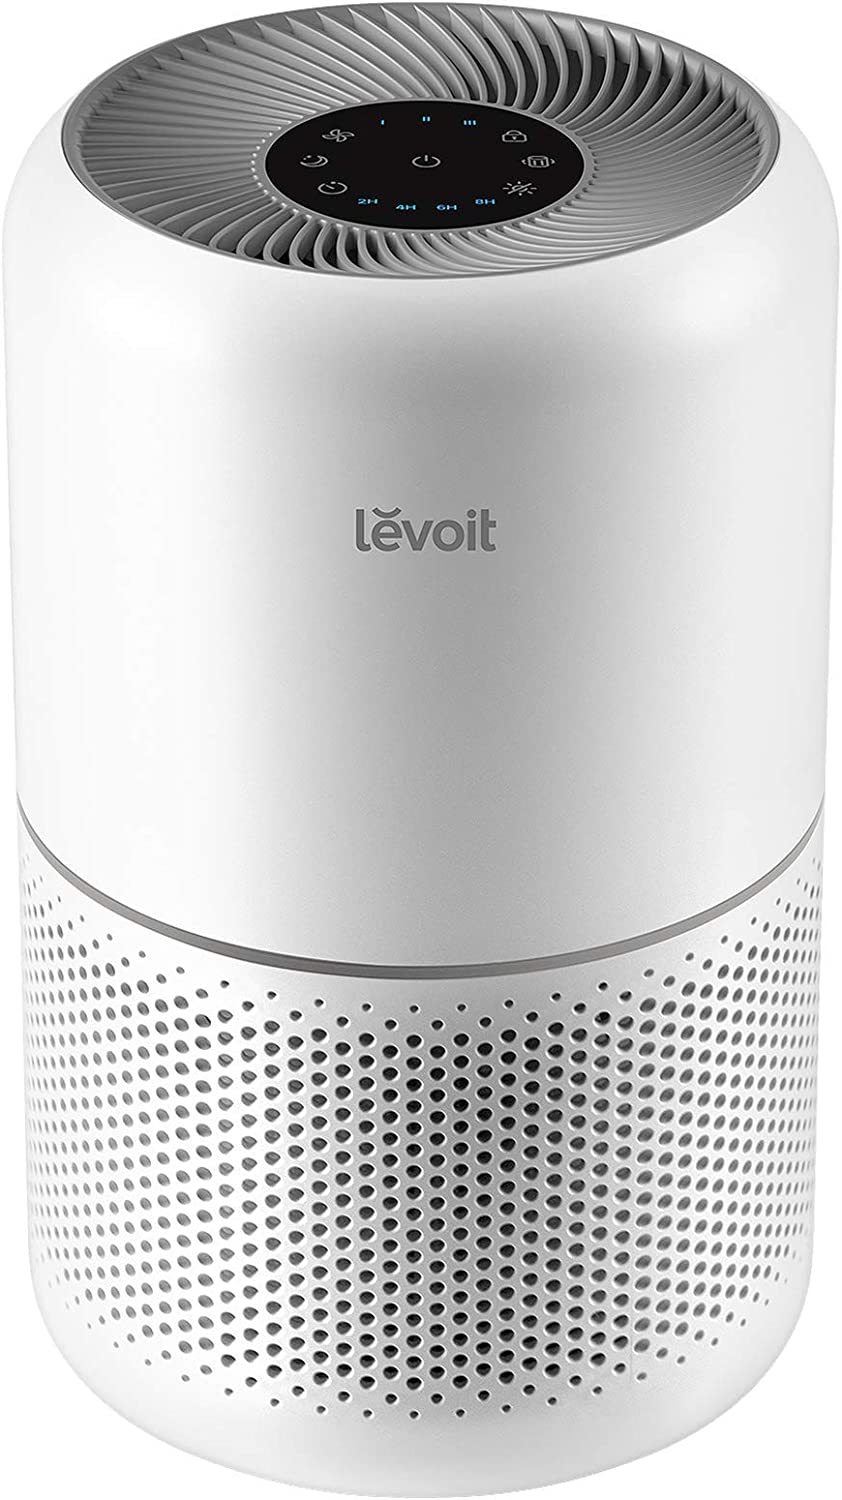  1. LEVOIT Smart Air Purifier for Home and Bedroom (White) 